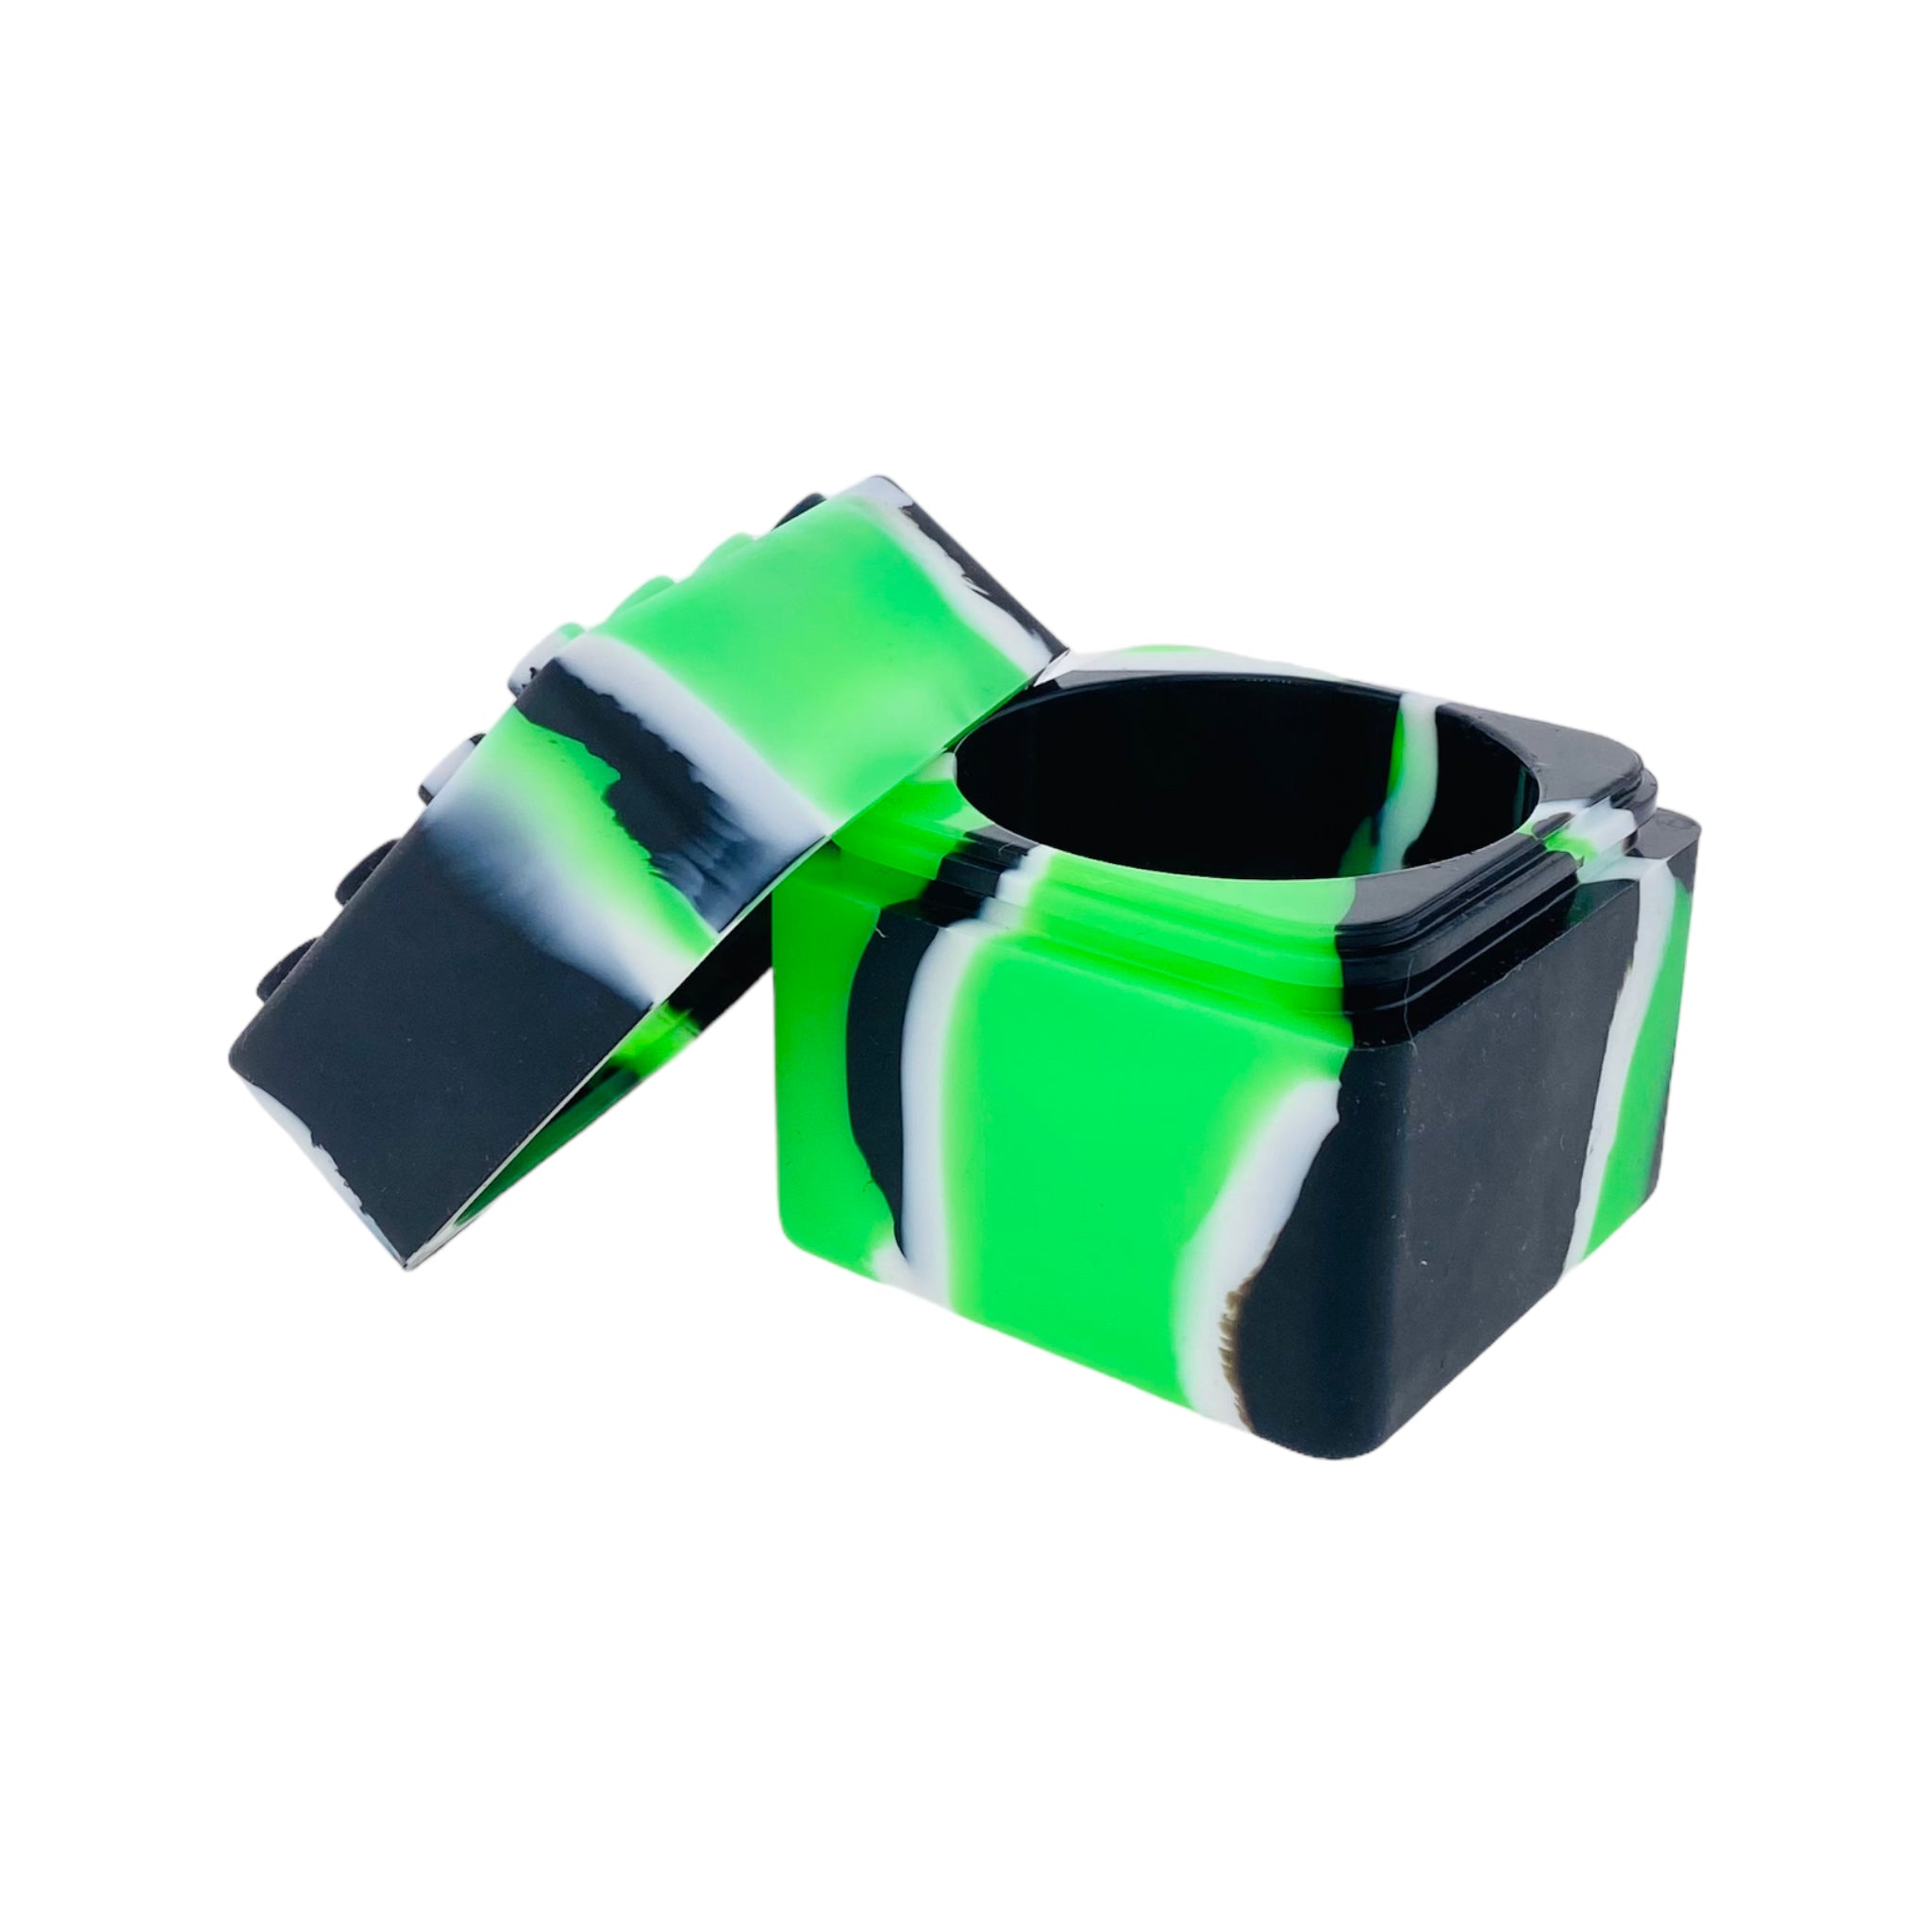 Large Square Silicone Container Green, White & Black